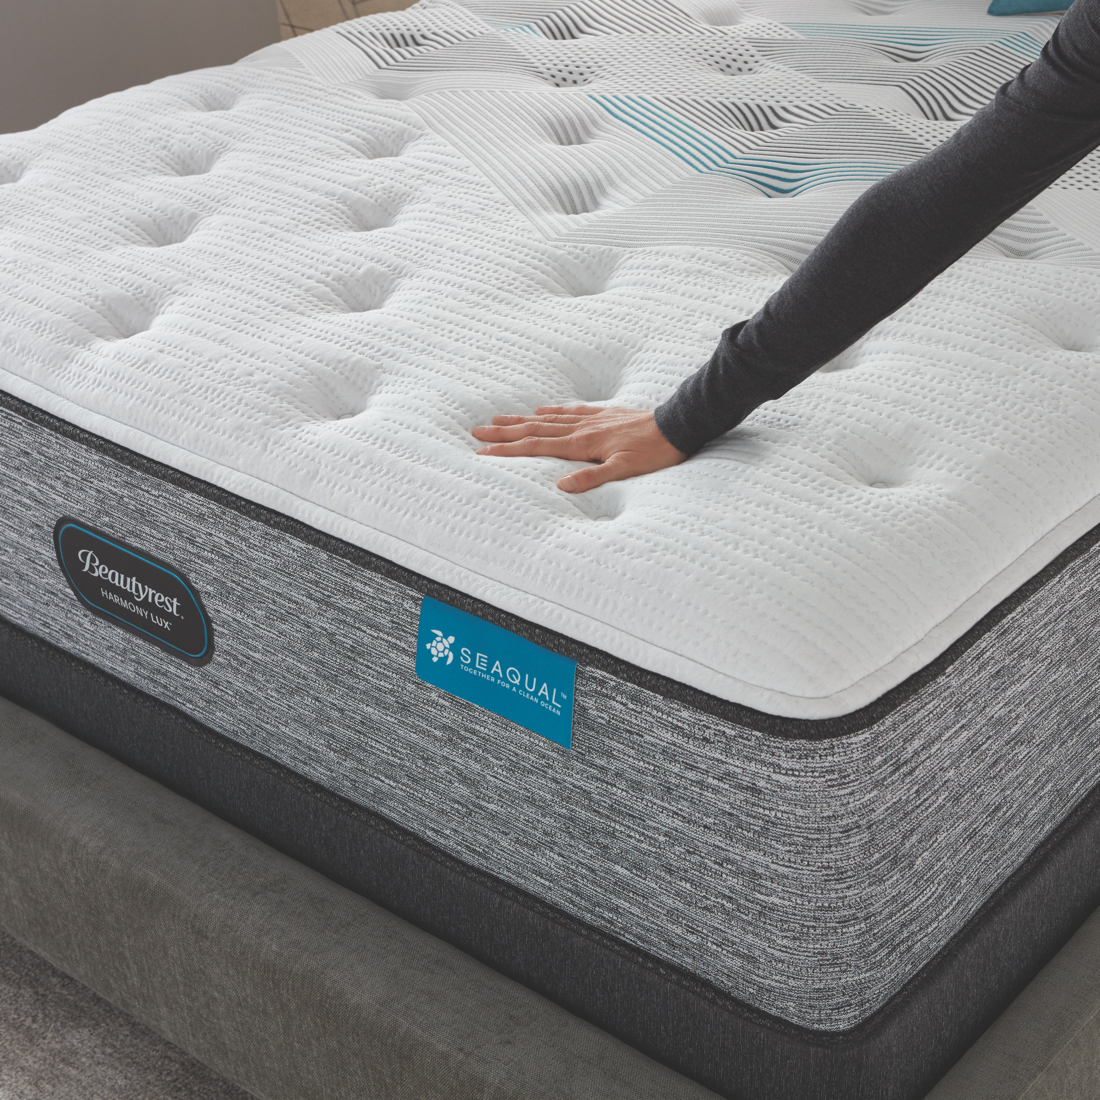 Hand touching the top of a Beautyrest Harmony Lux mattress on top of a Beautyrest flat foundation